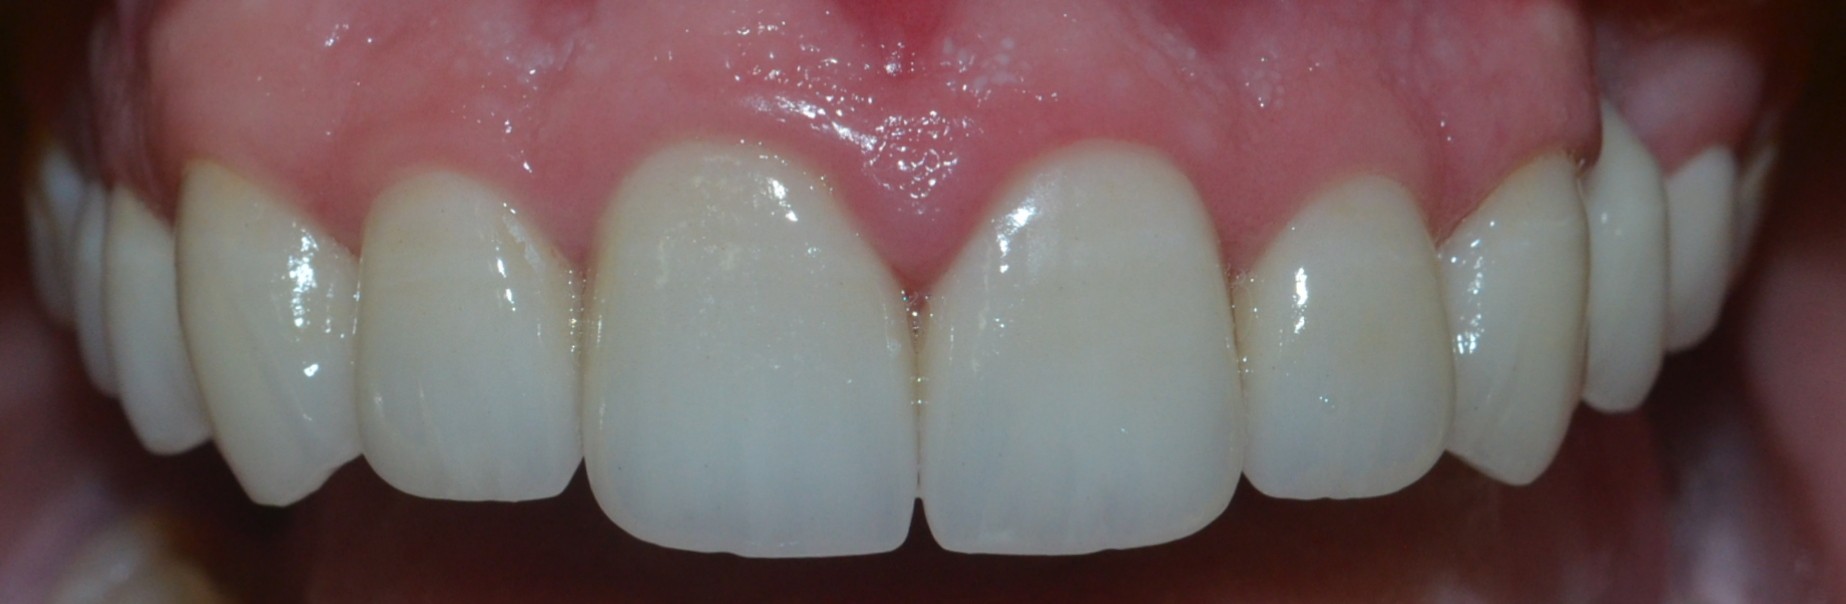 Teeth with Dental Crowns in Pune, India